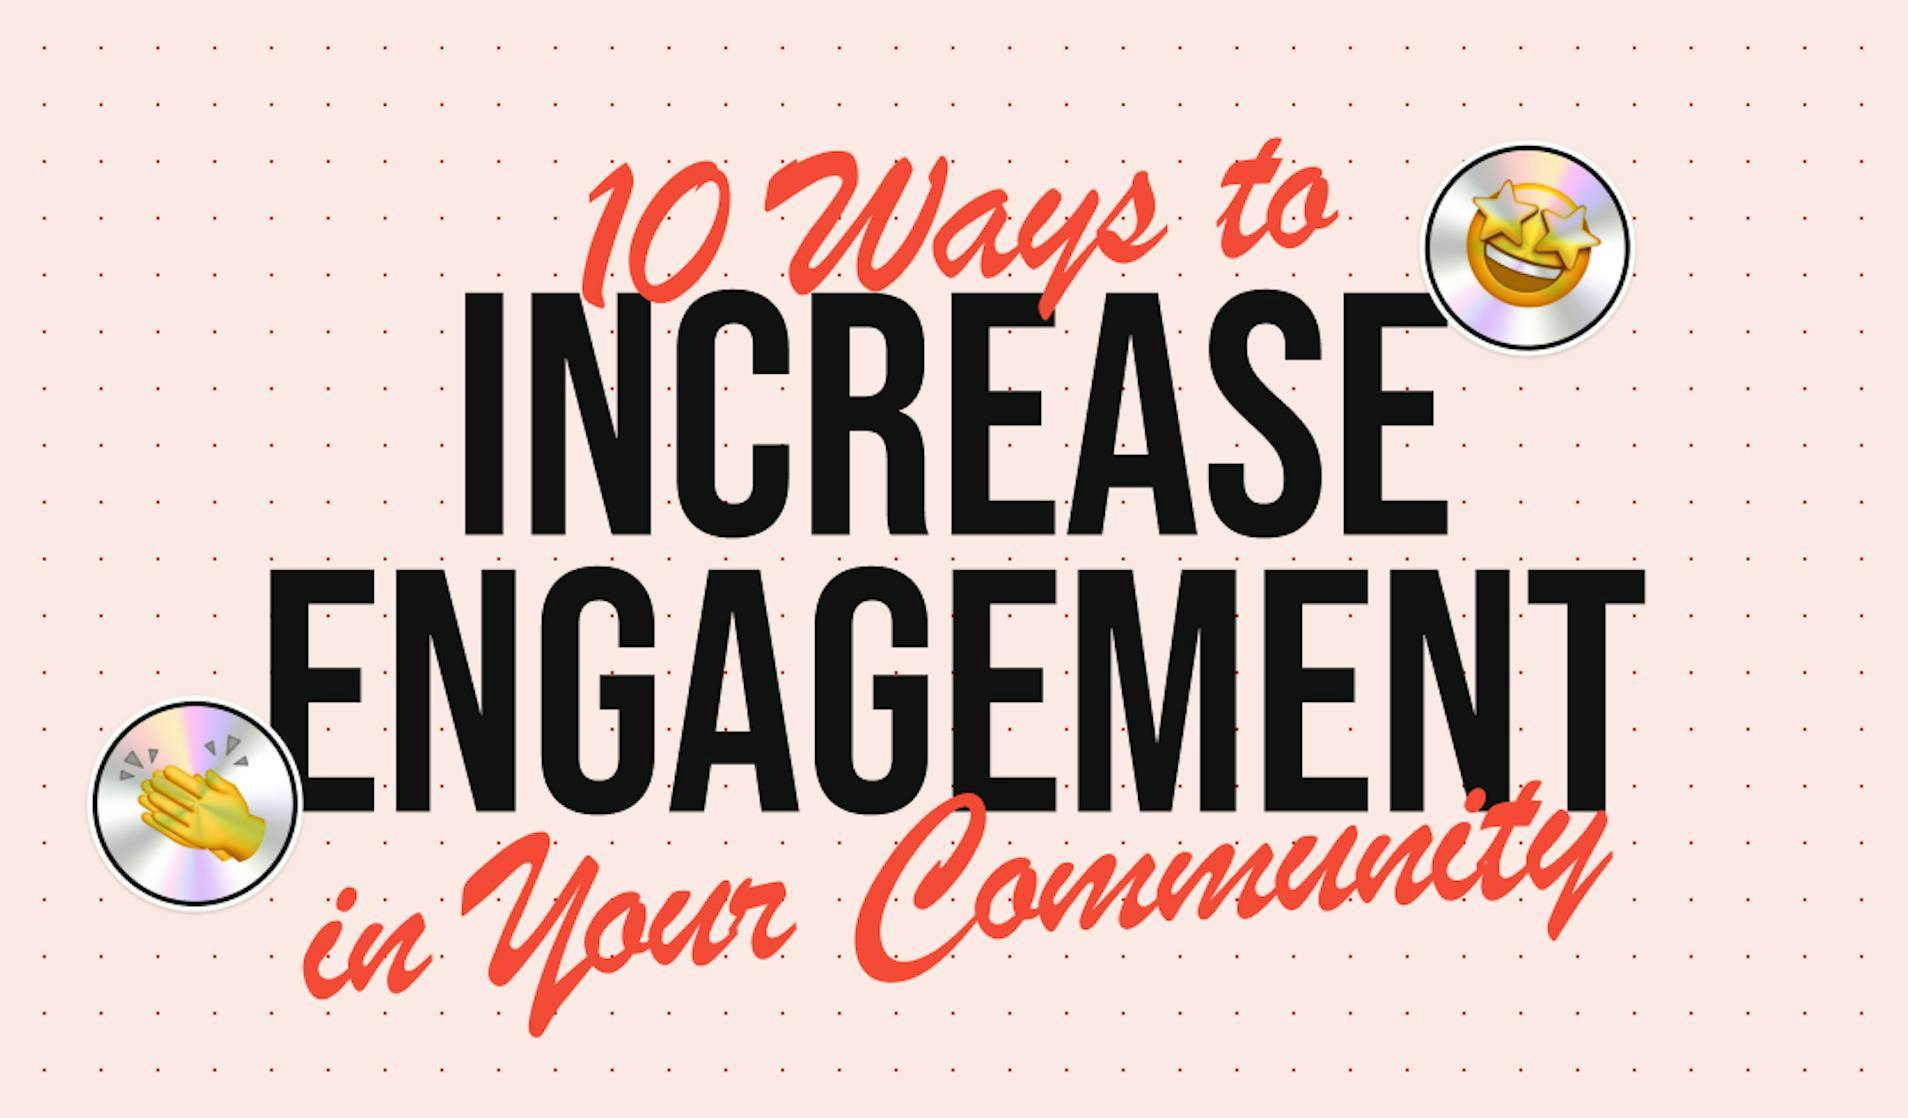 10 ways to increase community engagement on social media